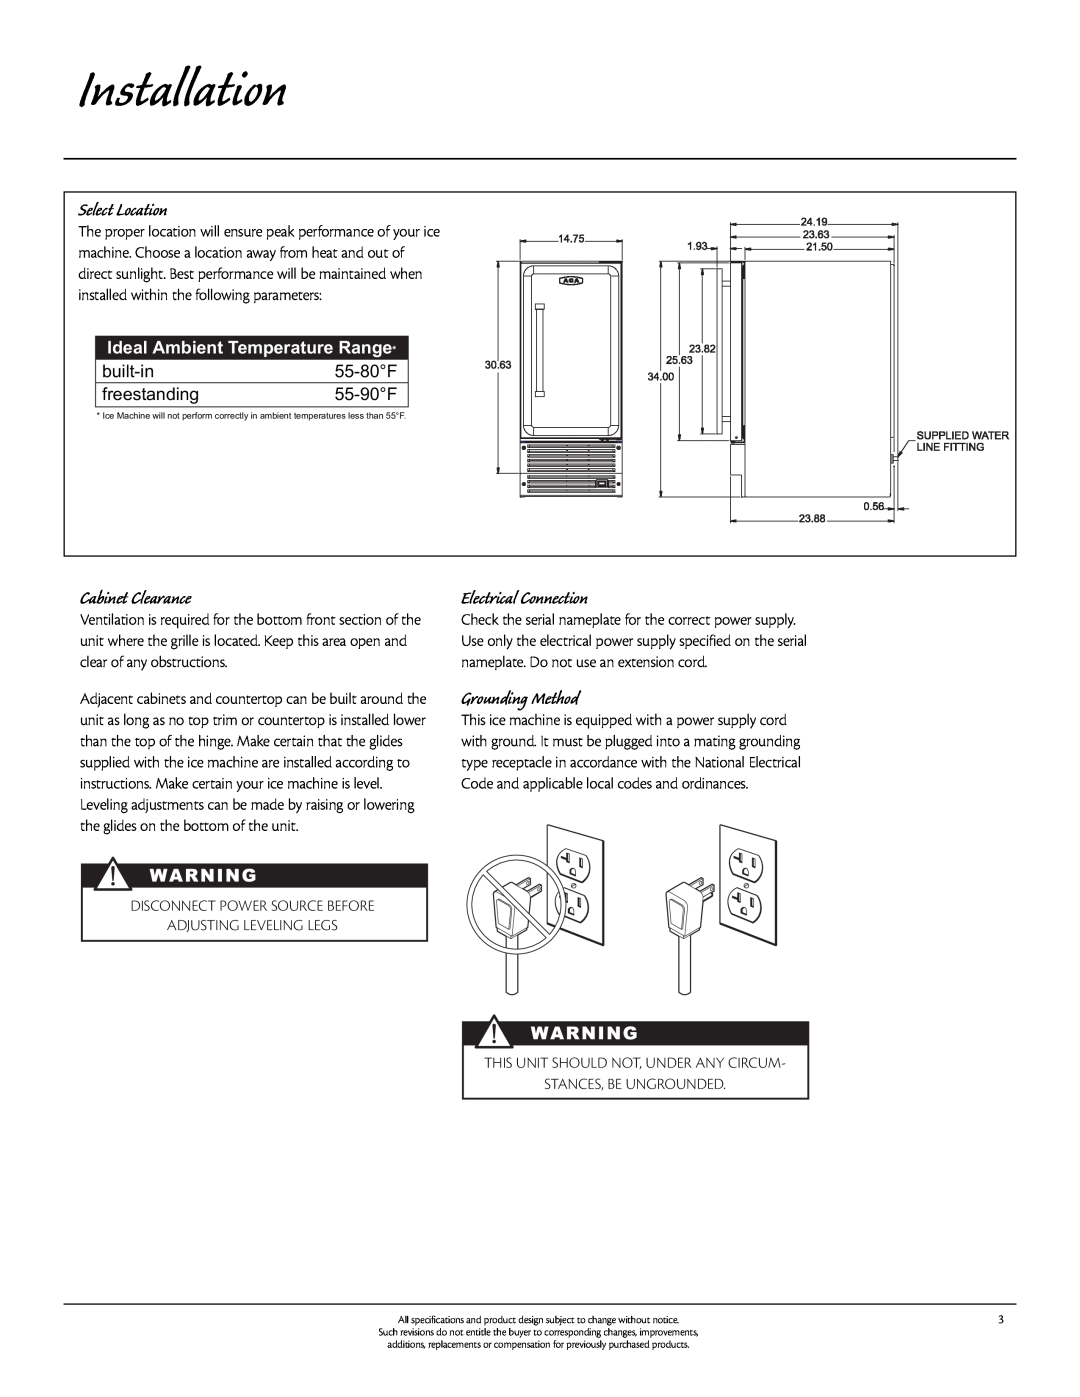 Aga Ranges 30AIM manual Installation, Select Location, Cabinet Clearance, Electrical Connection, Grounding Method 